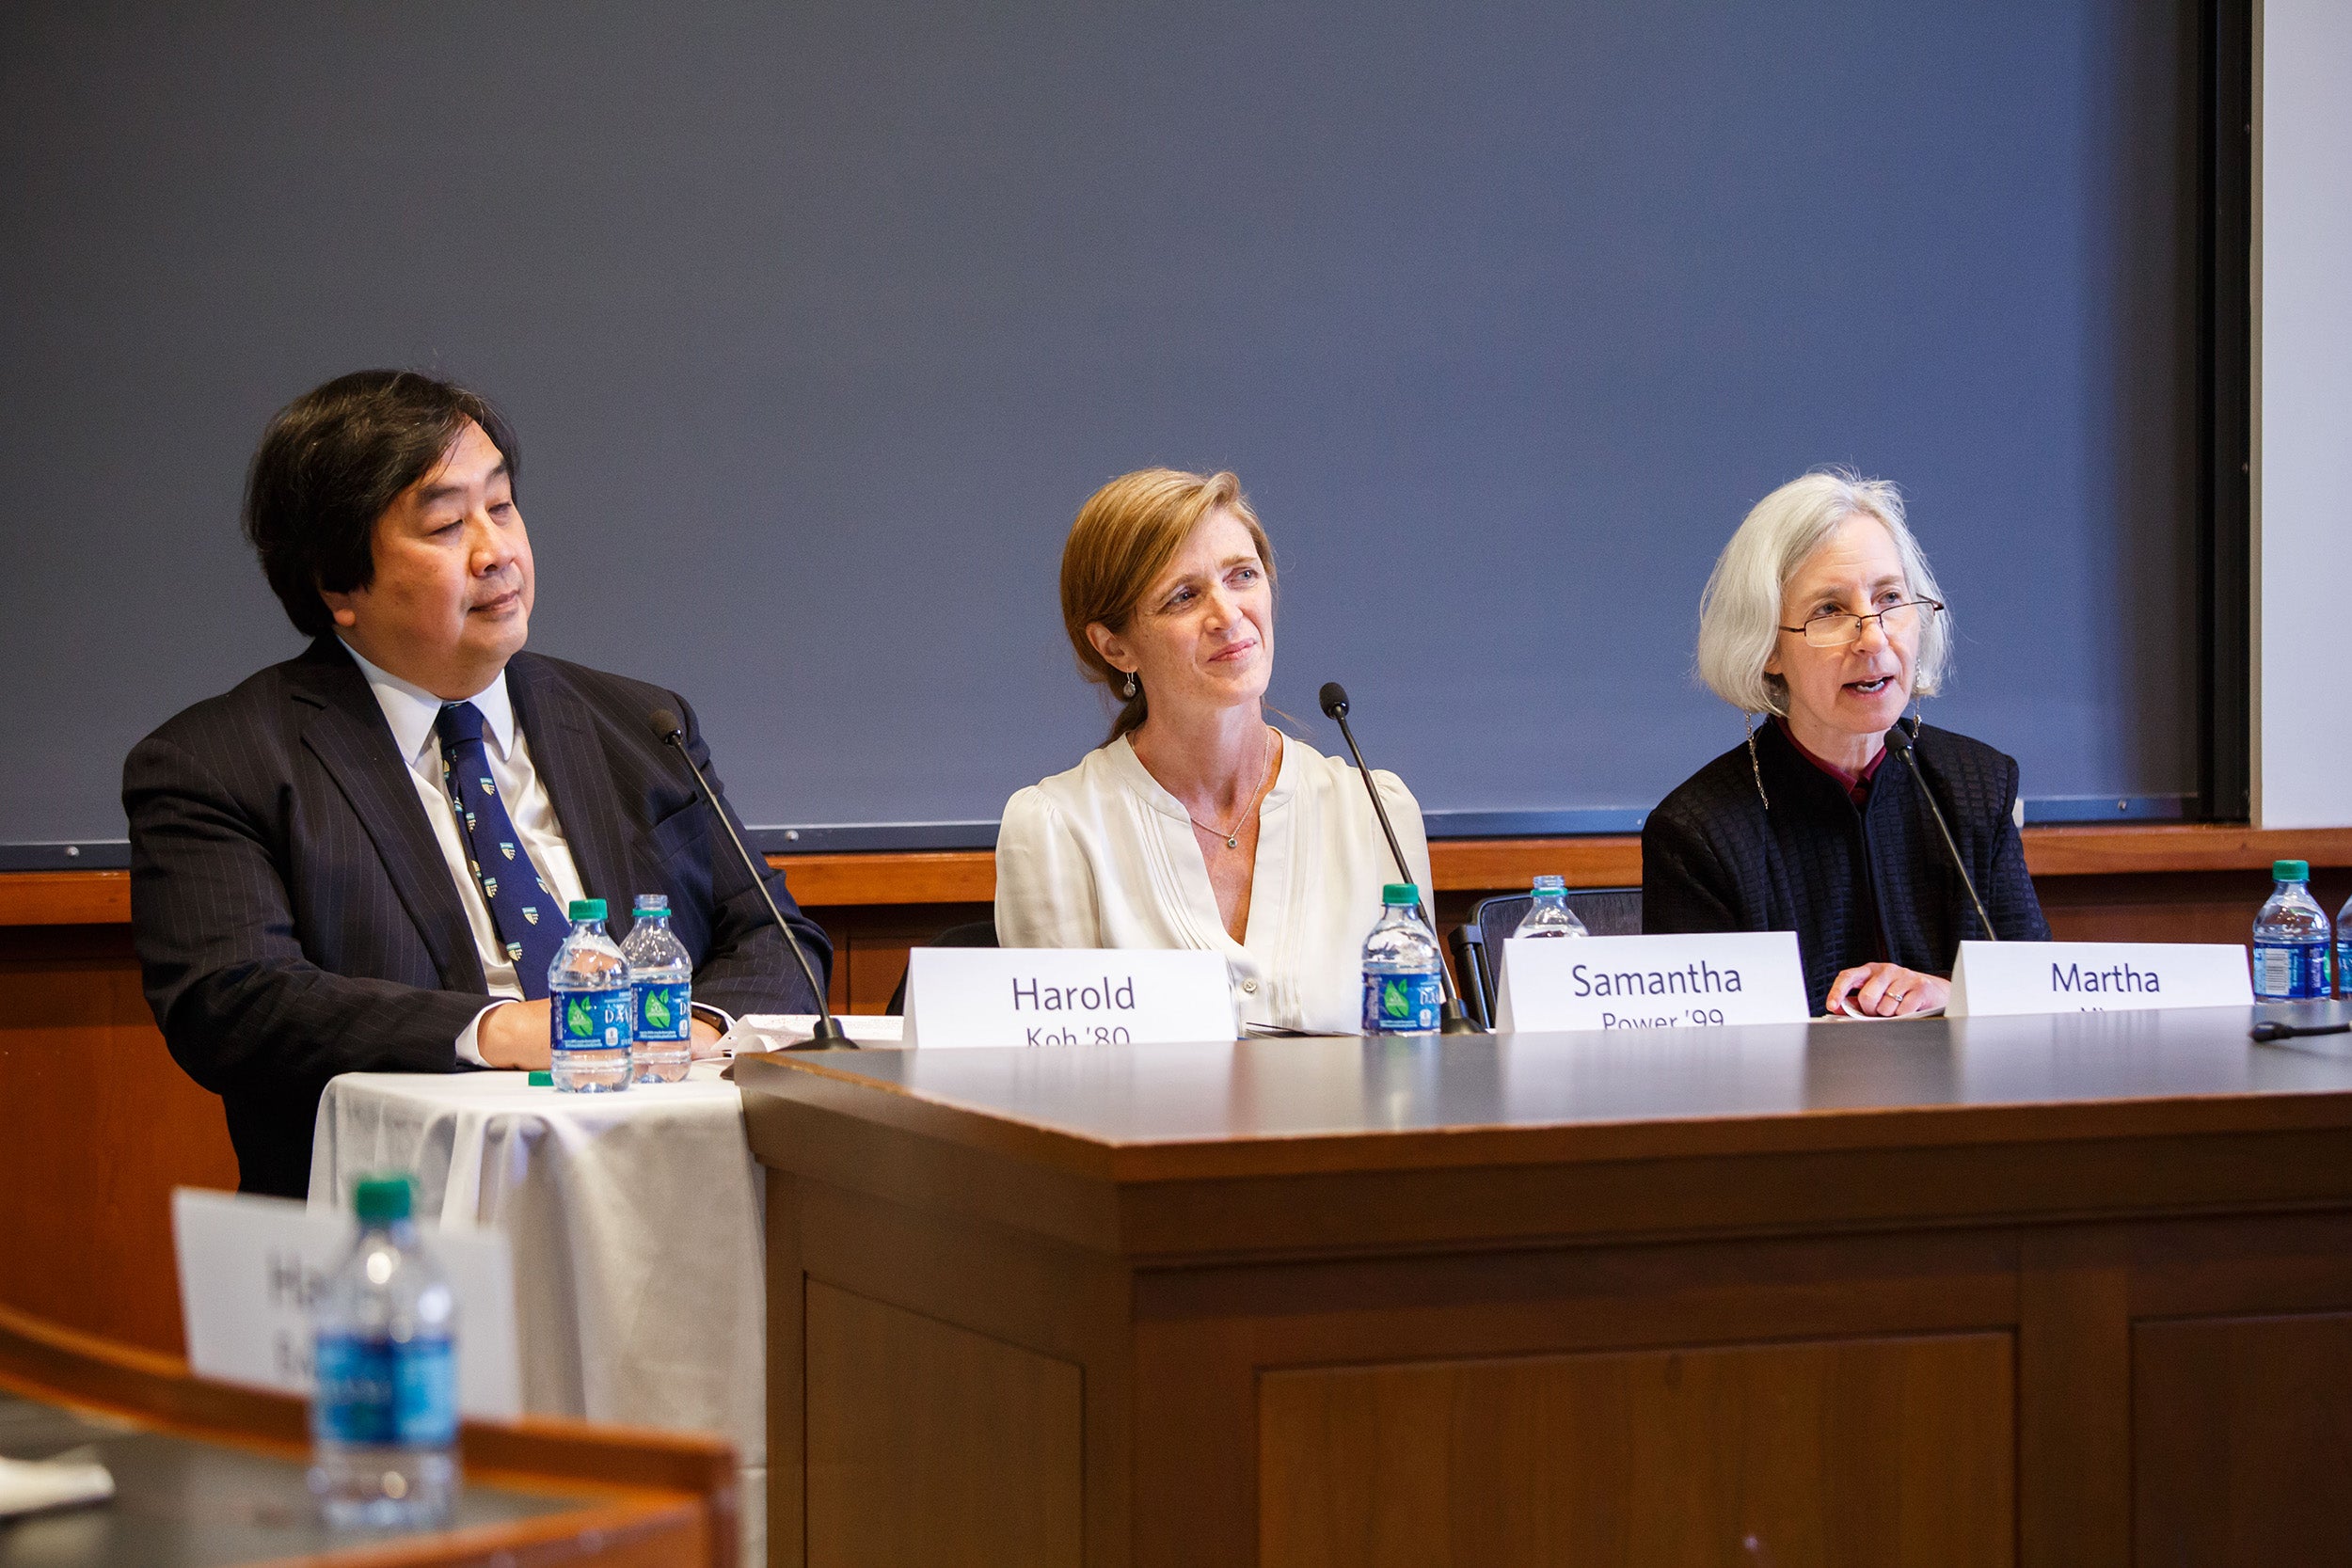 Professors and government officials: Samantha Power and Harold Koh